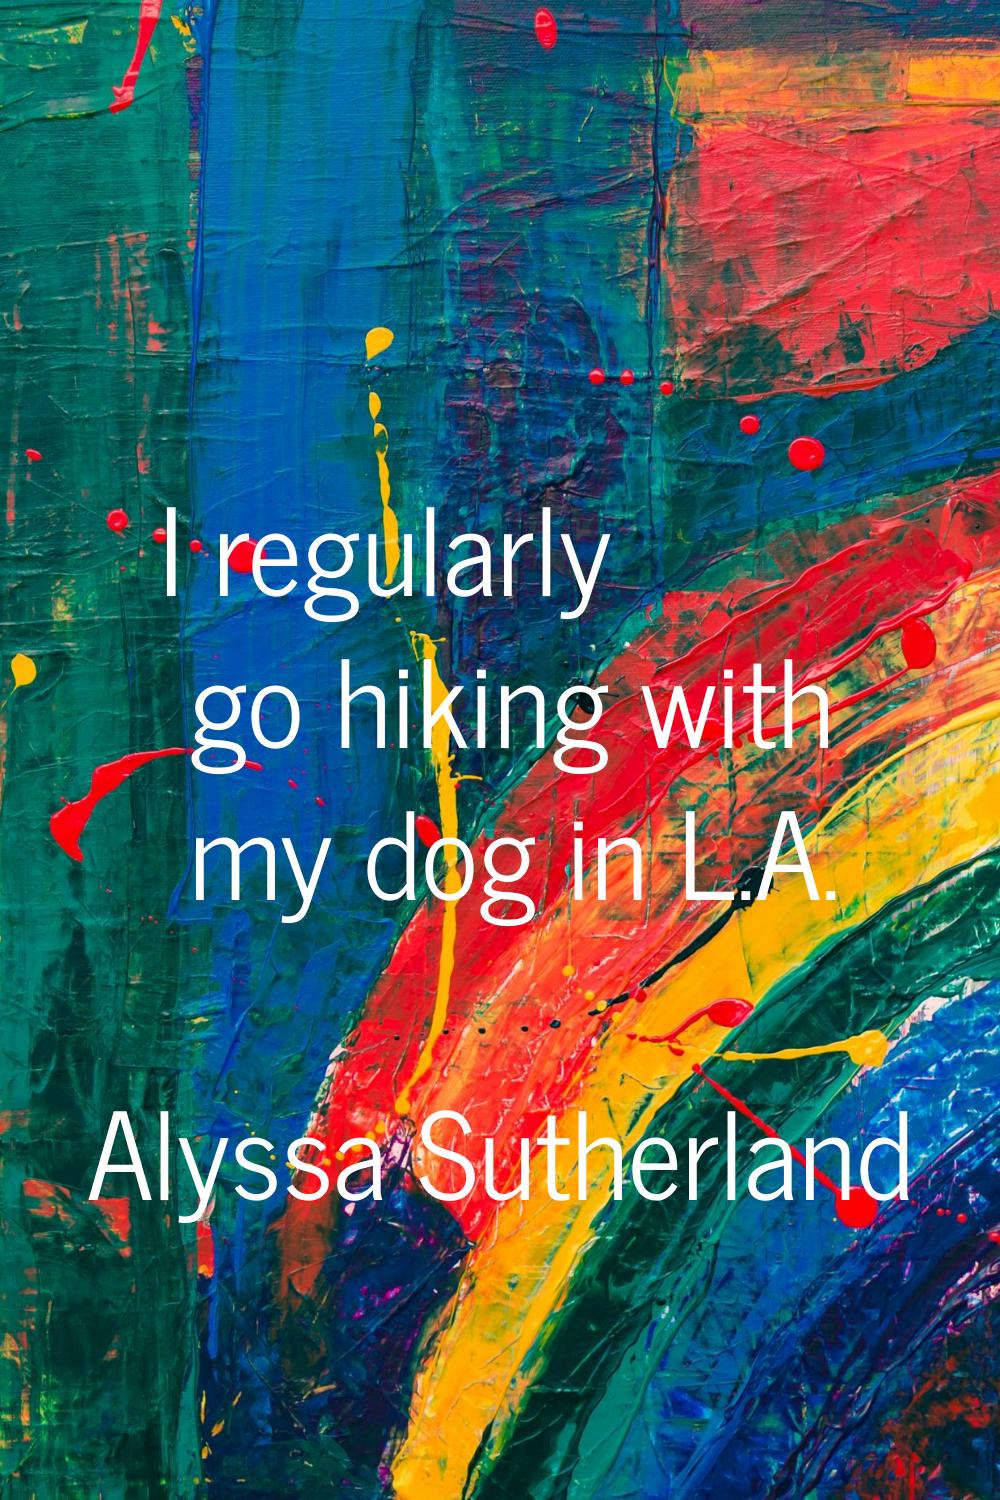 I regularly go hiking with my dog in L.A.